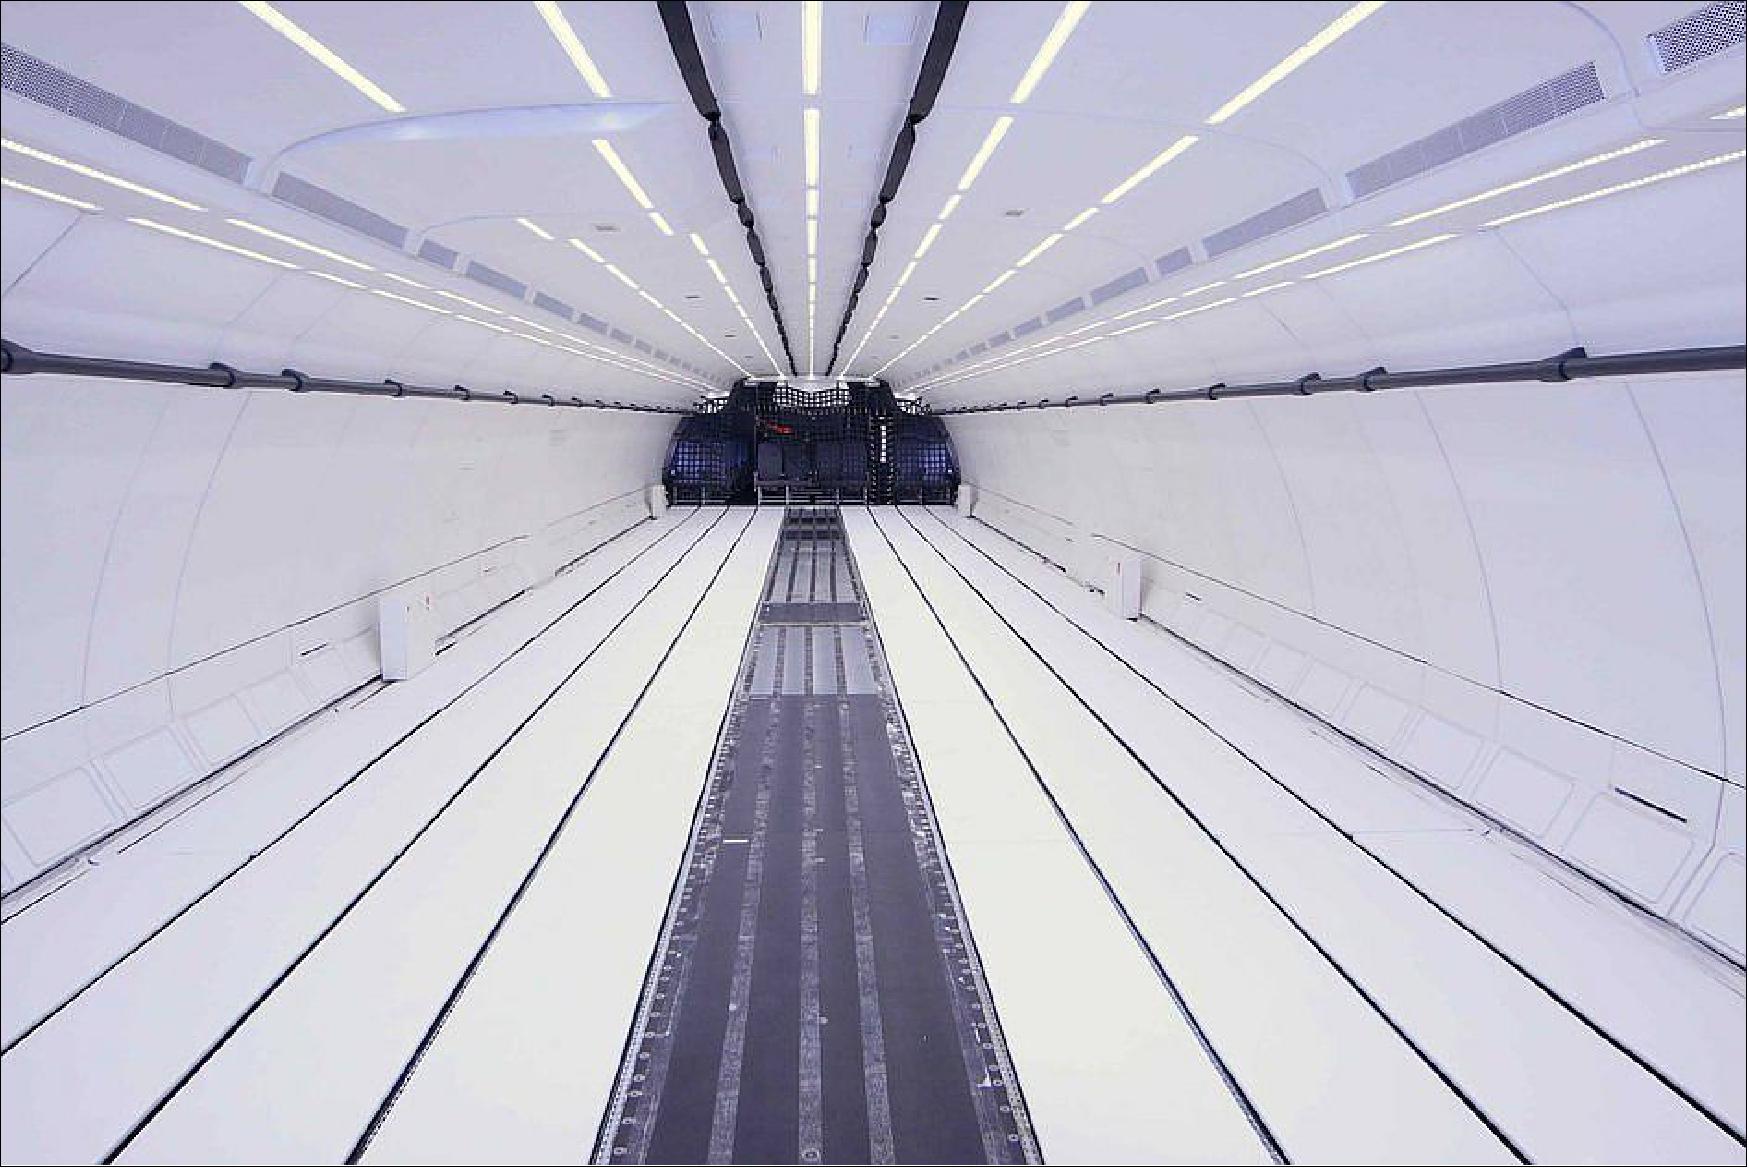 Figure 43: An inside view of the refitted Airbus A310 aircraft (image credit: Novespace, ESA) 37)